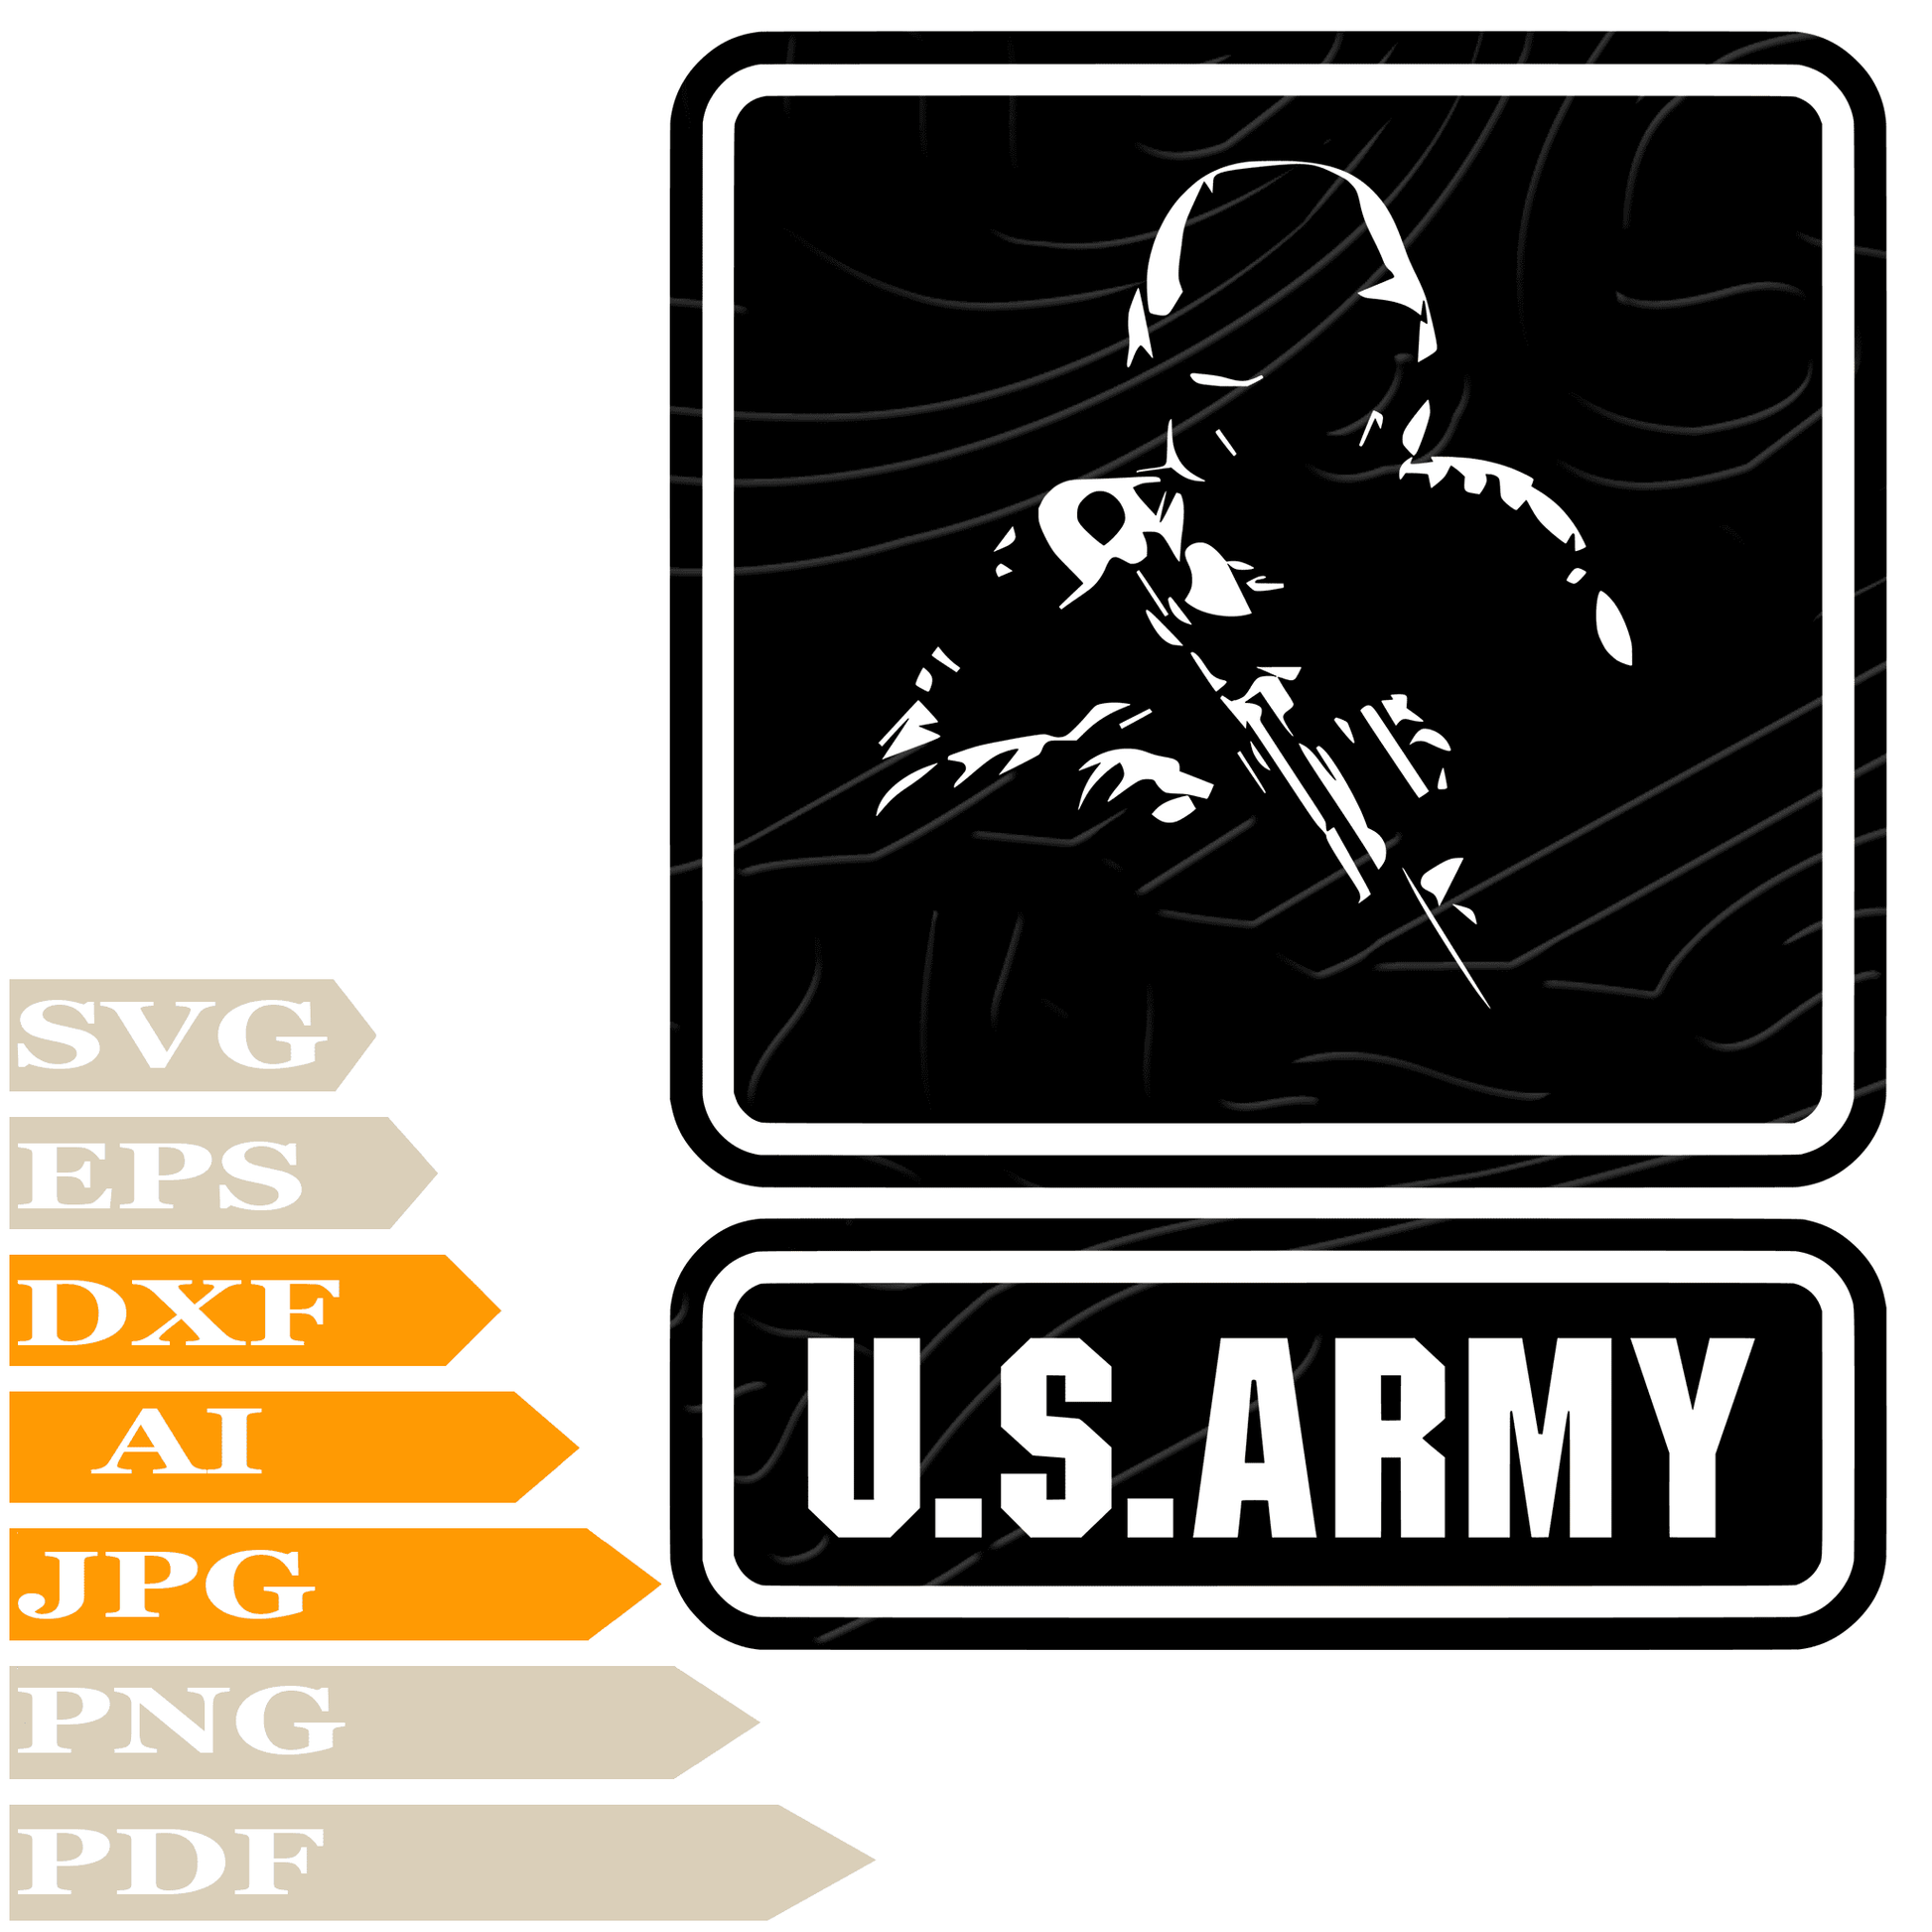 Soldier SVG File - U.S. Army Vector Graphics - Soldier SVG Design - Hero Soldier PNG-Cricut-Cut File-Clipart-For Tattoo-Print-Decal-Shirt-Silhouette